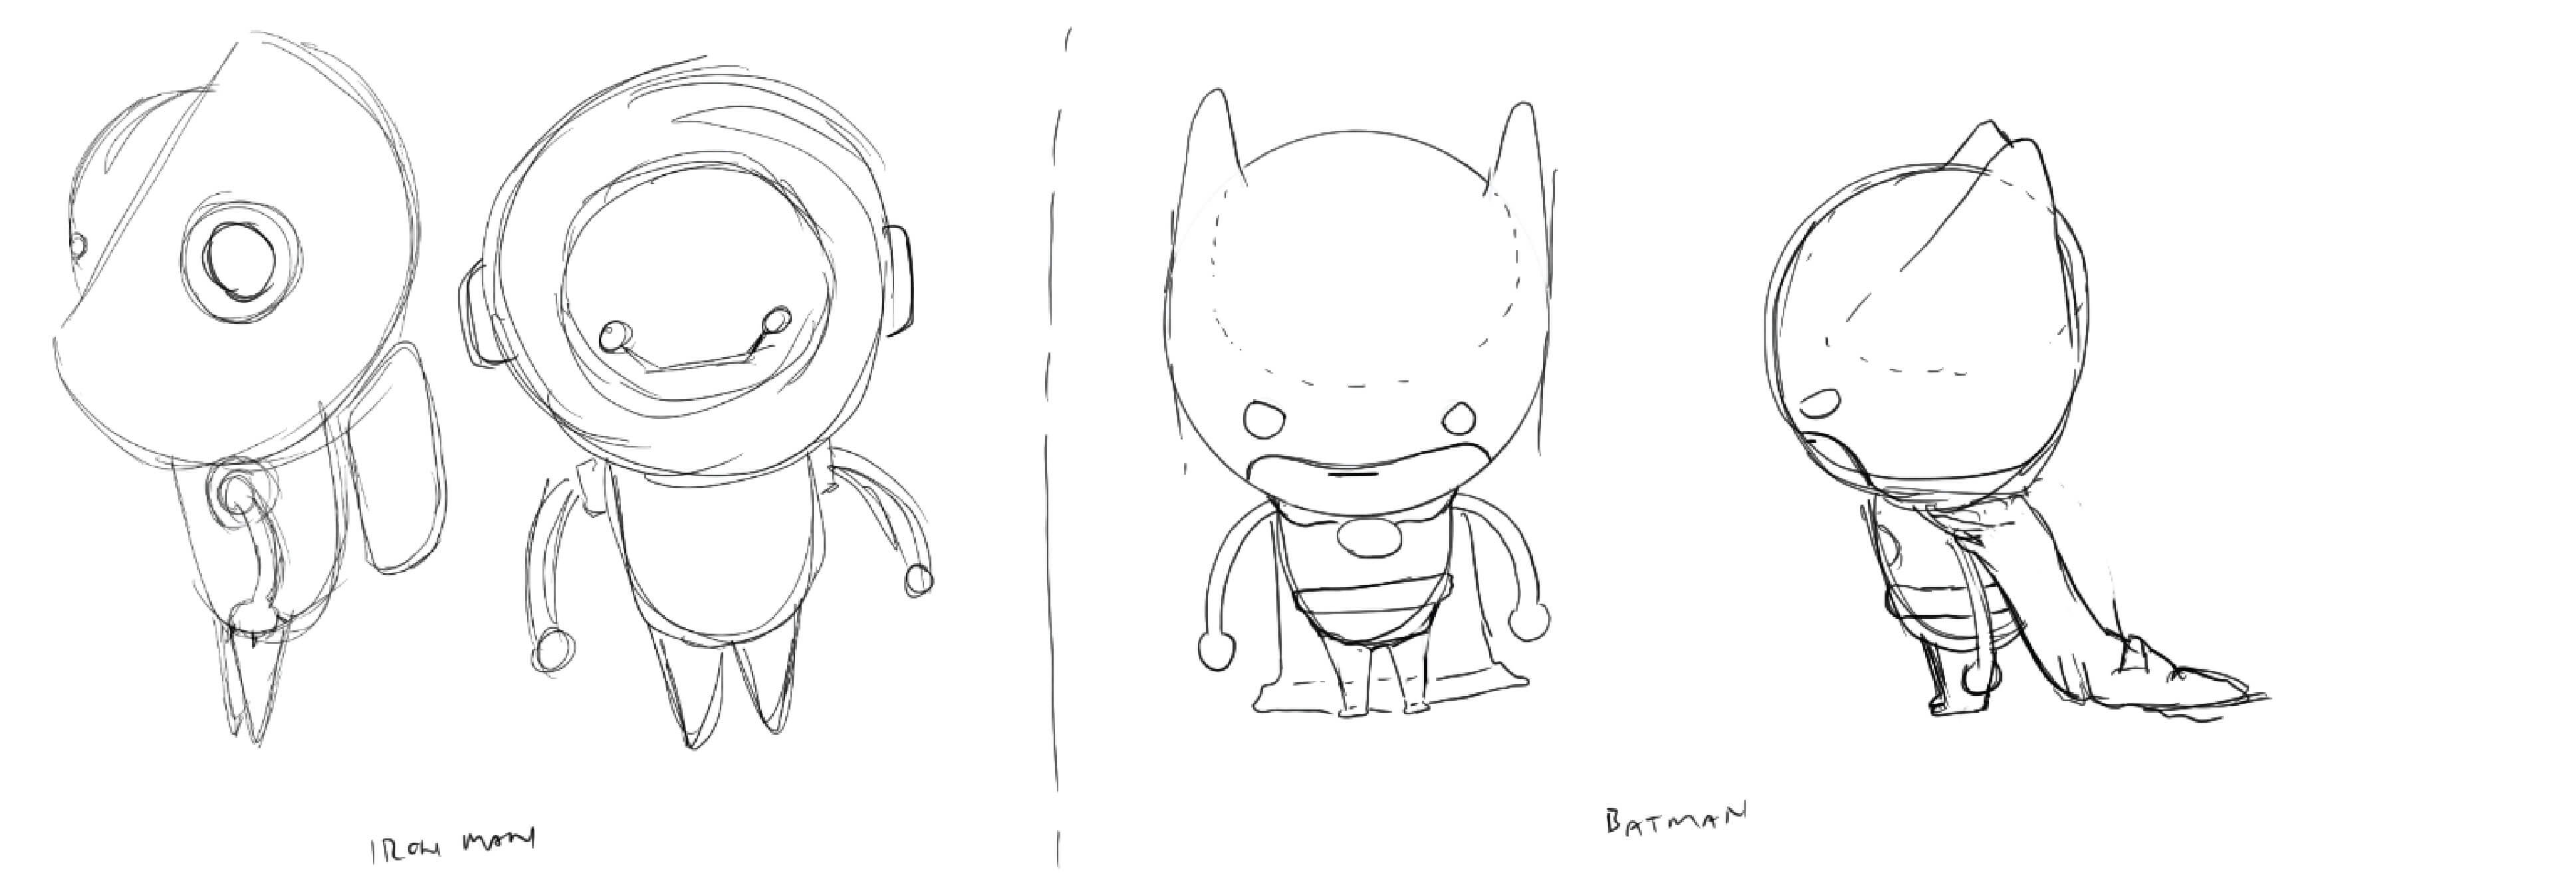 Rough character sketches of ironman and batman to be used for 3D production